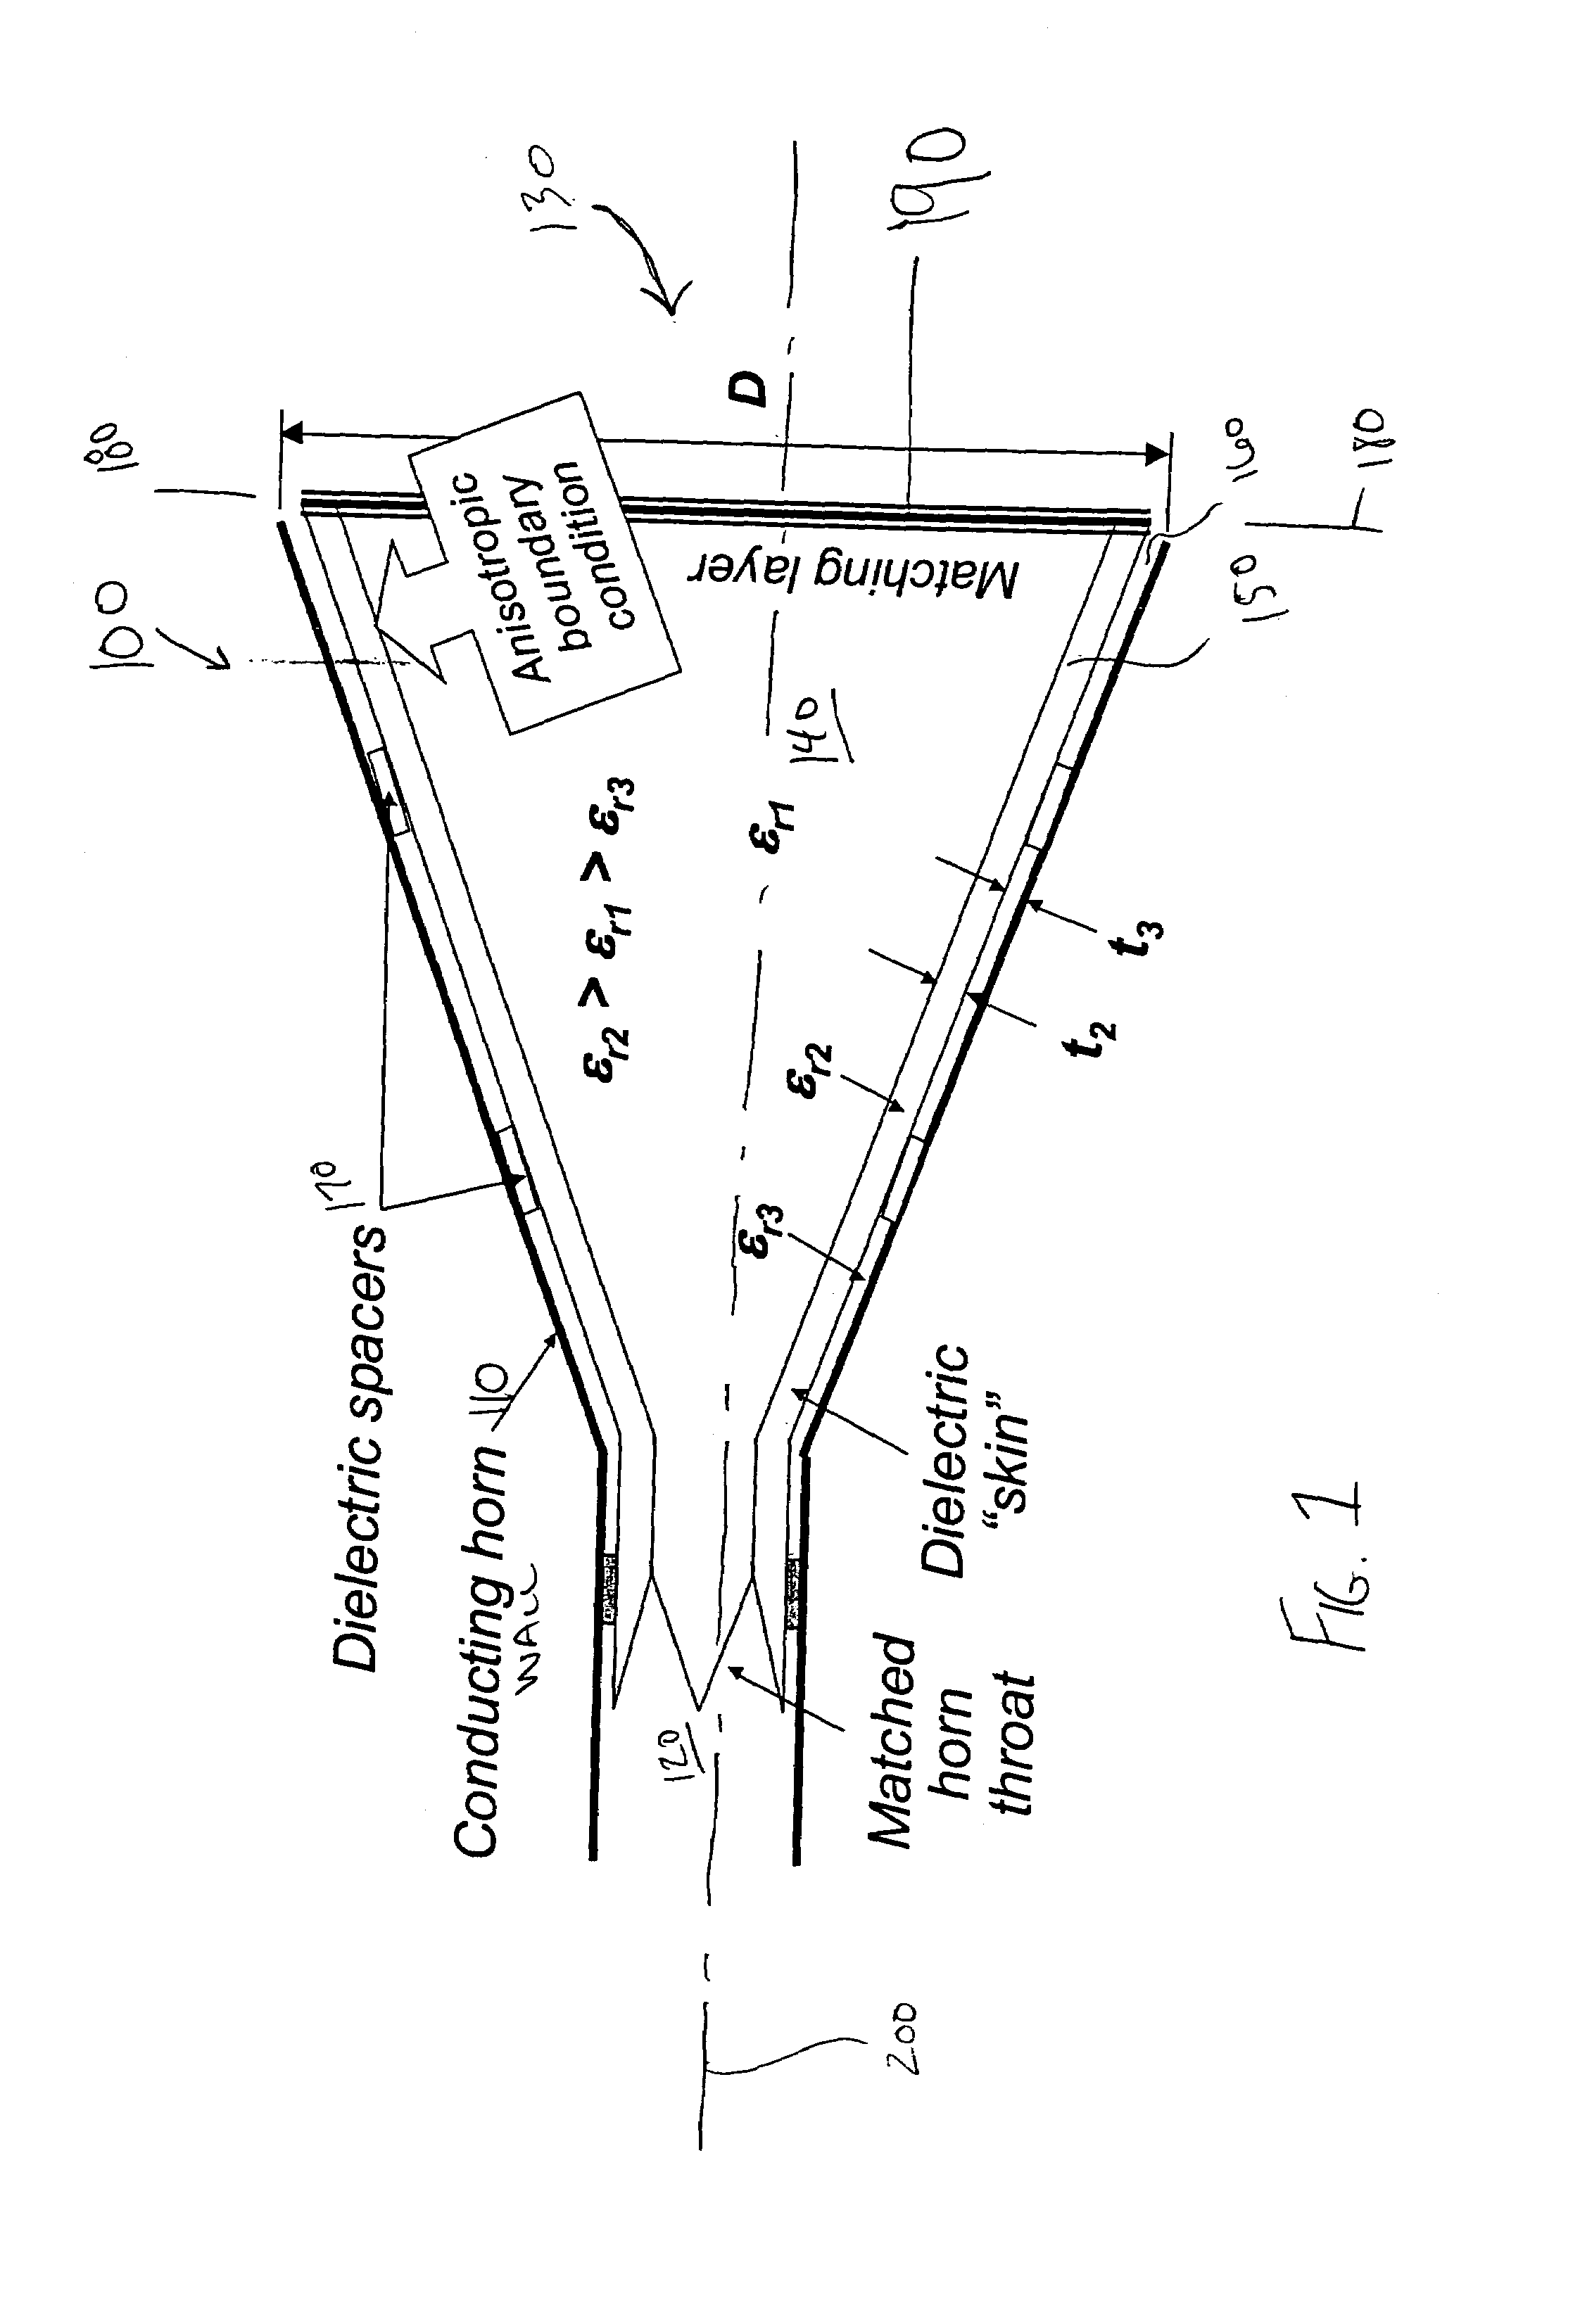 Hybrid-mode horn antenna with selective gain